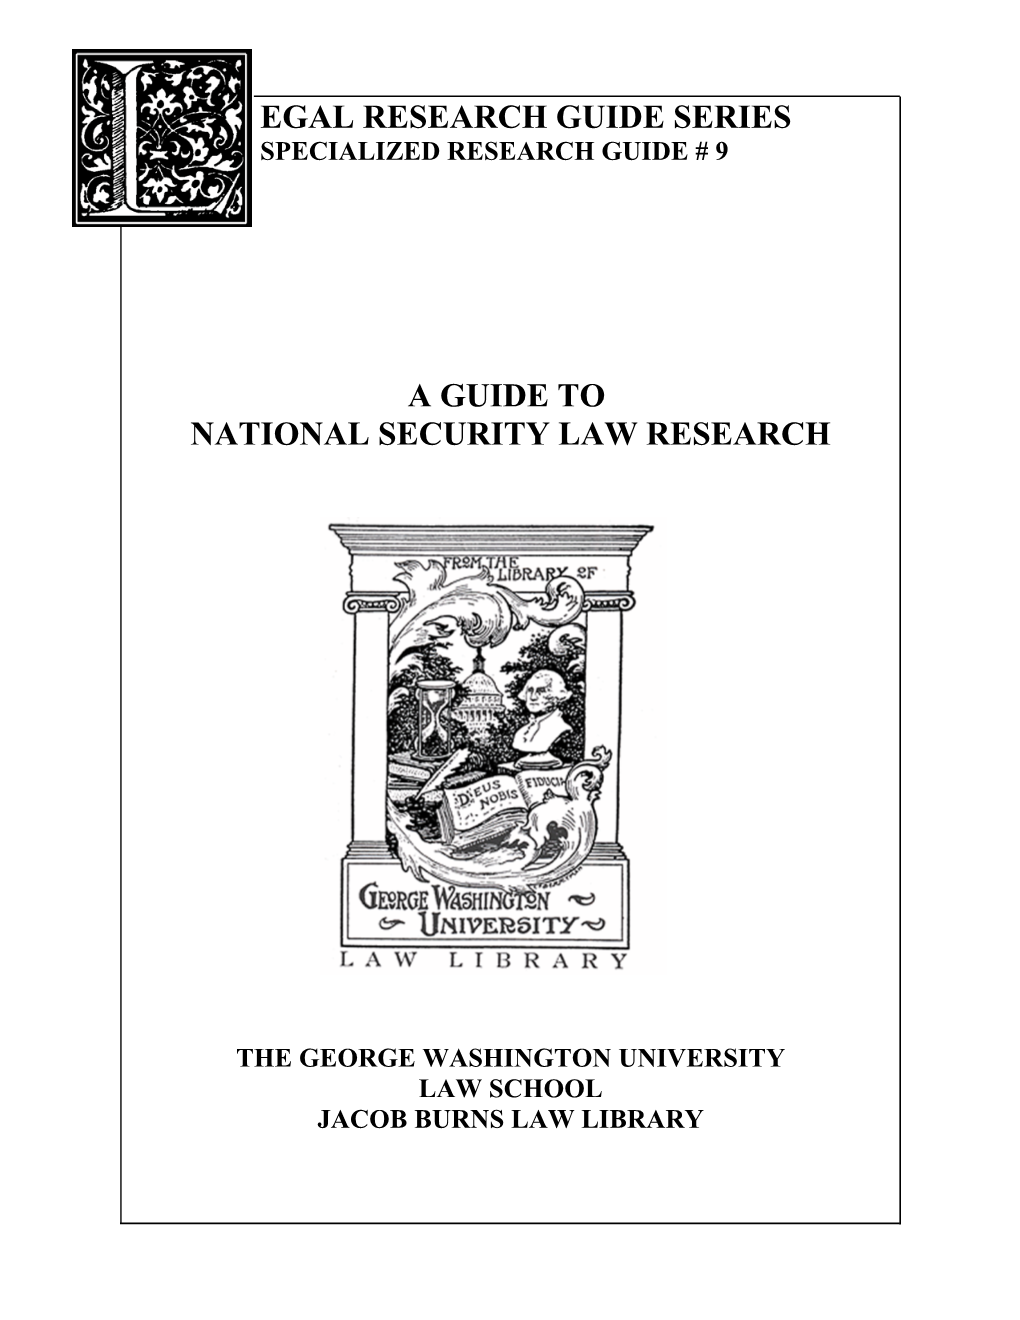 Egal Research Guide Series a Guide to National Security